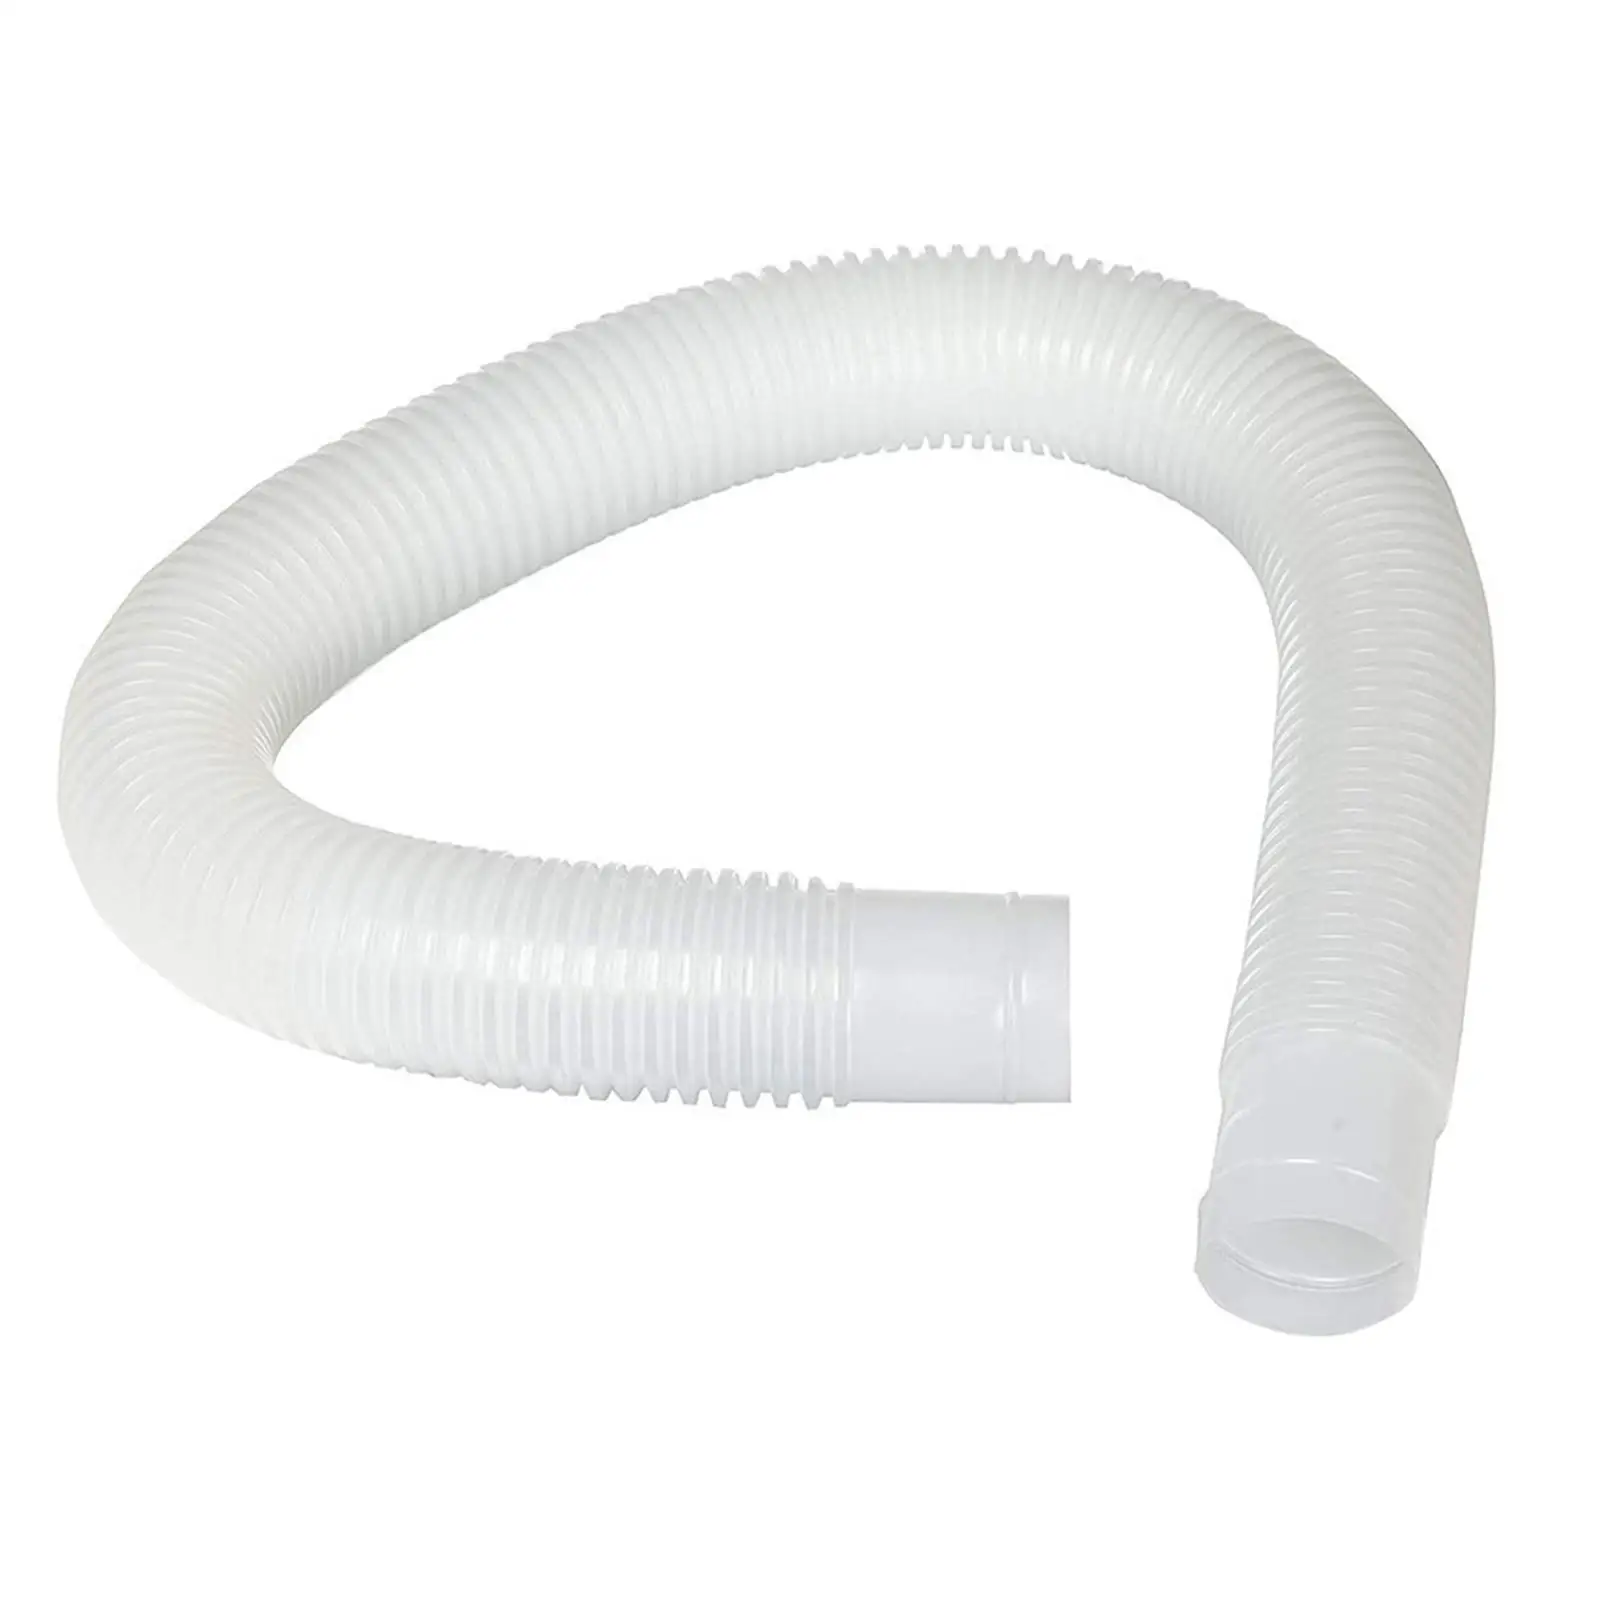 Pools Skimmer Hose Accessory Durable Pools Vacuum Pump Skimmer Hose Pools Water Inlet Pipe Surface Skimmer Replacement Hose